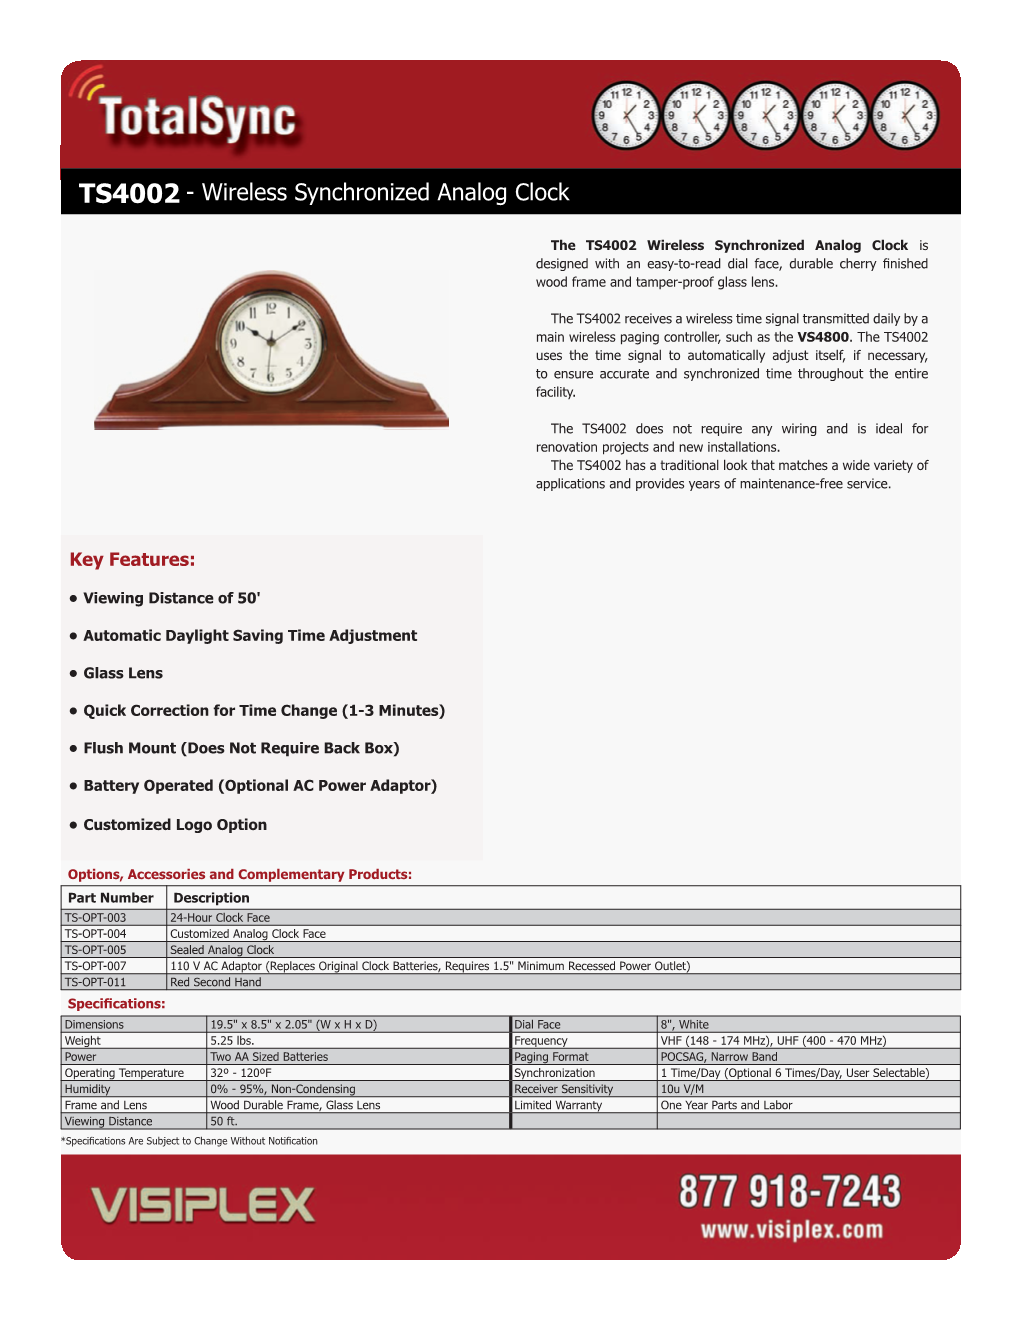 TS4002 Wireless Synchronized Analog Clock Is Designed with an Easy-To-Read Dial Face, Durable Cherry Finished Wood Frame and Tamper-Proof Glass Lens